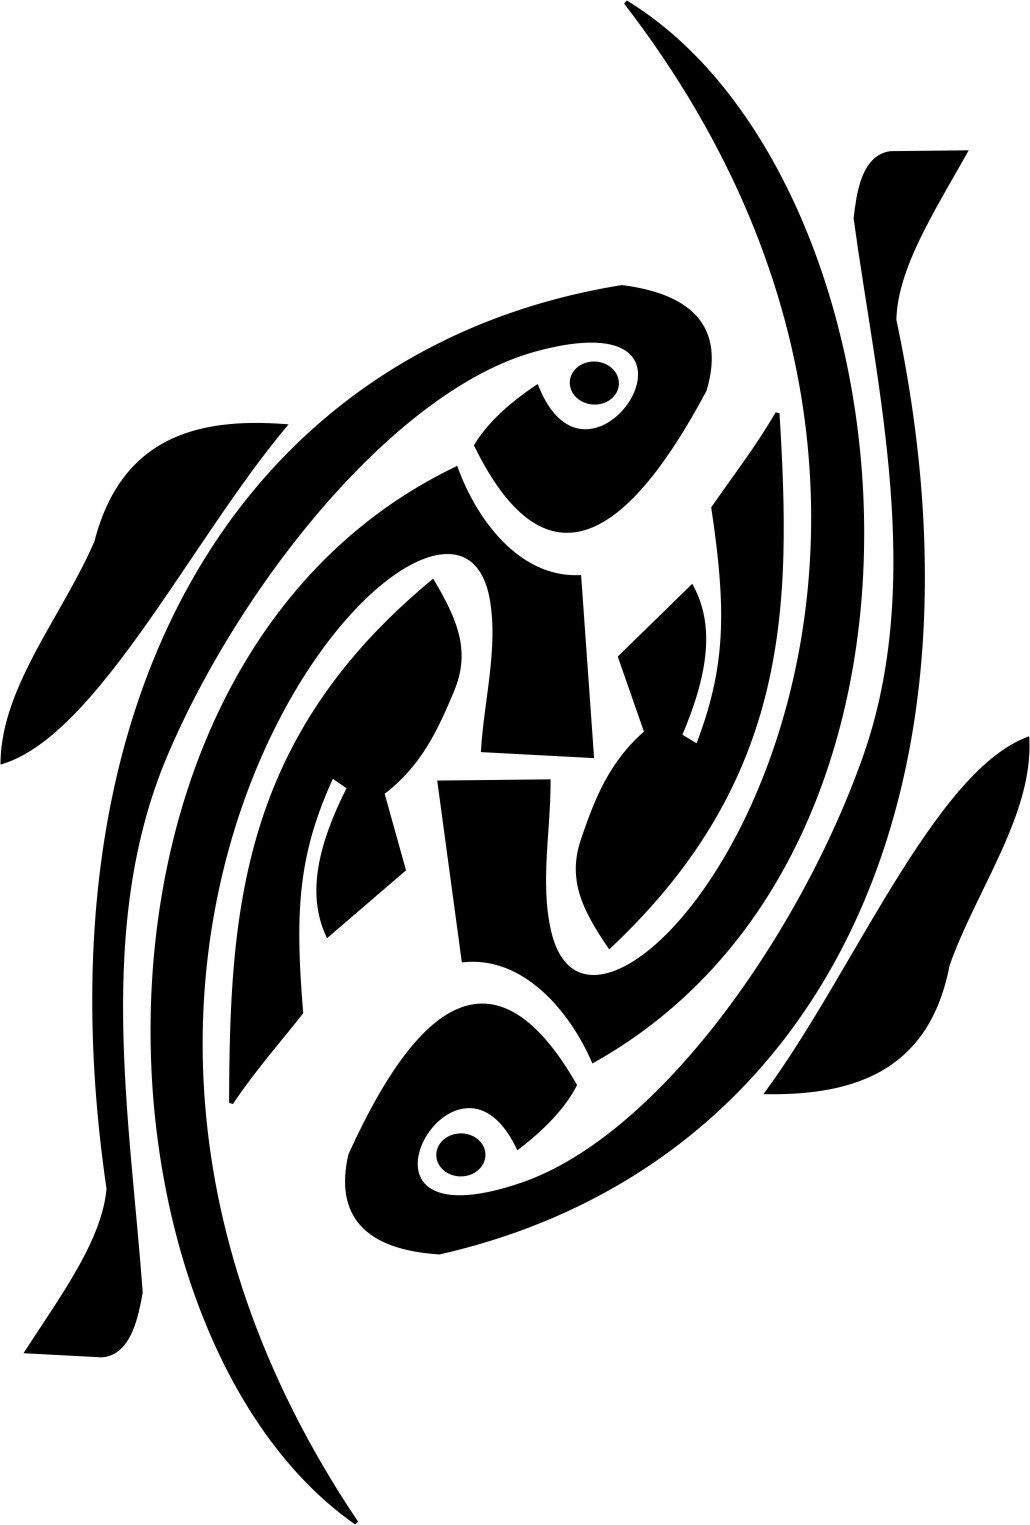 Pisces Designs Tattoo Tribal Tattoos In Black And Yellow - Free ...